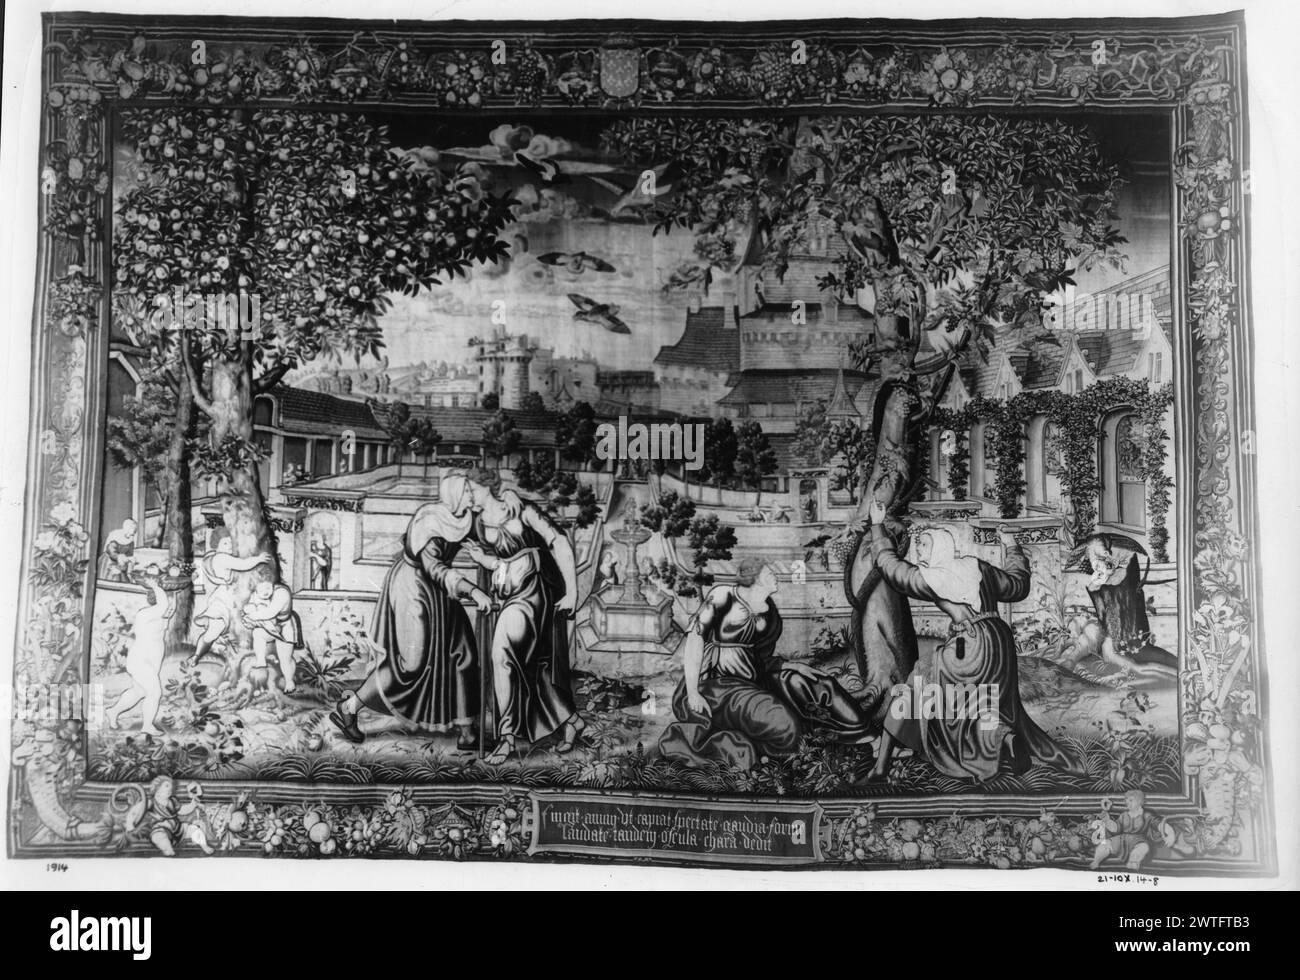 Vertumnus, in guise of old woman, kisses Pomona. unknown c. 1535-1550 Tapestry Dimensions: H 14'8' x W 21'10' Tapestry Materials/Techniques: unknown Culture: Flemish Weaving Center: Brussels Ownership History: Sold at Hôtel Drouot (Paris), 4/7/1877, lot 35 (Duc de Berwick et d'Albe sale). Baron D'Erlanger coll. French & Co. purchased from E. Gimpel & Wildenstein 2/1/1917. William Randolph Hearst coll., as of 1941. Inscriptions: Latin inscription in lower border not legible in photograph Related Works: Panels in set: GCPA 0236979-0236982, 0238276; compositionally similar tapestries (similar bor Stock Photo